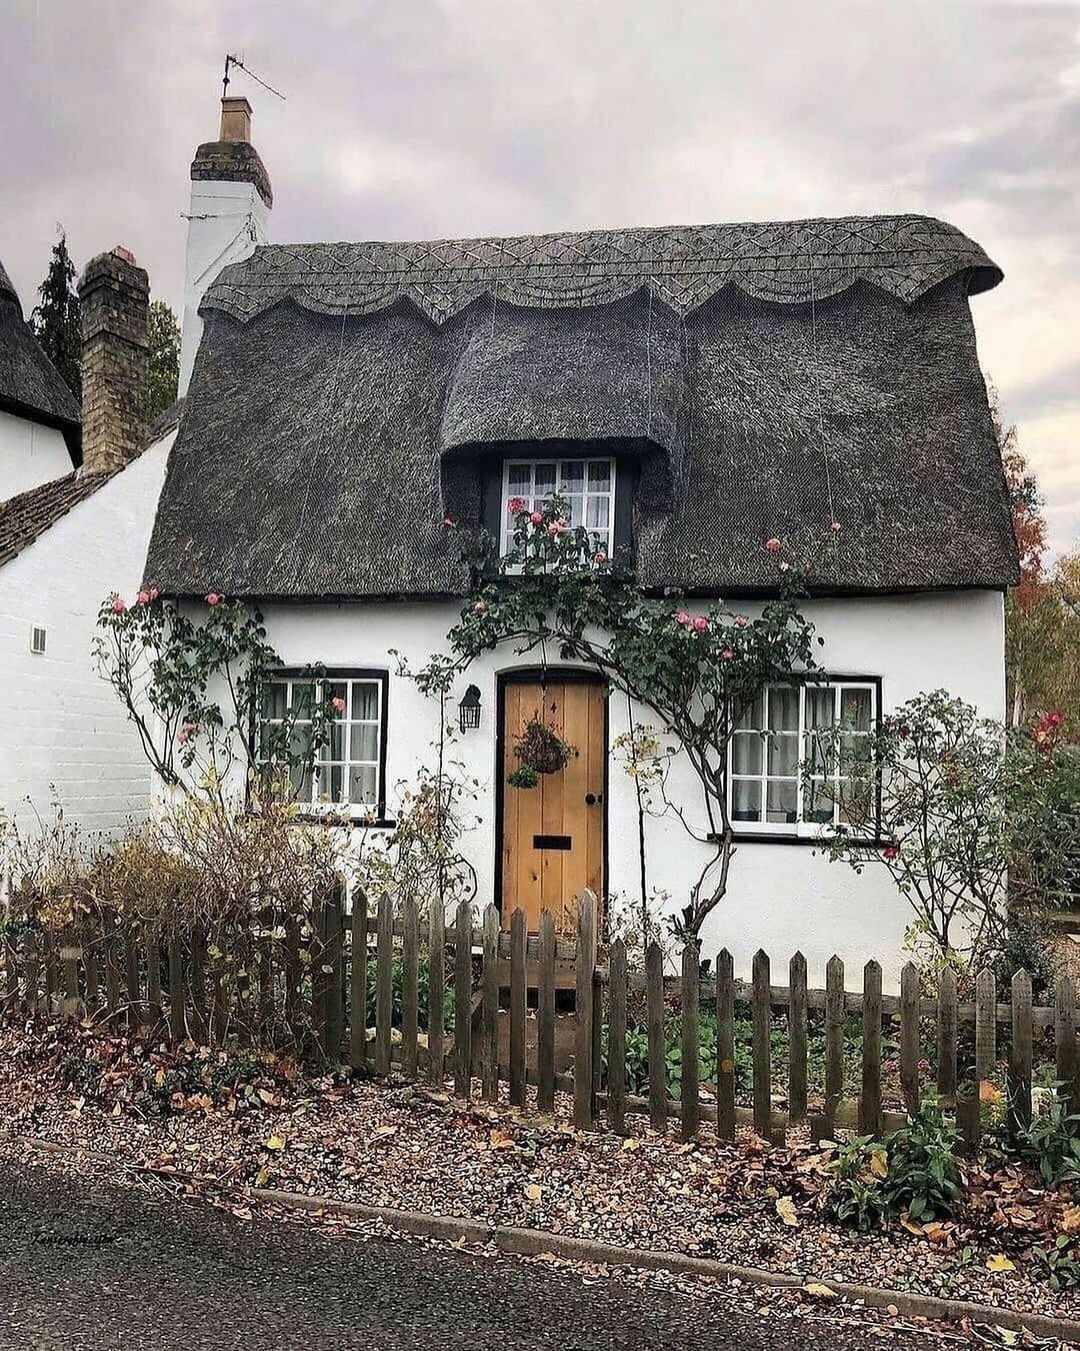 This Adorable Chapel Bank Cottage Is Over 400 Years Old And Located In The Small Historic Village Of Bourn In South Cambridgeshire, England